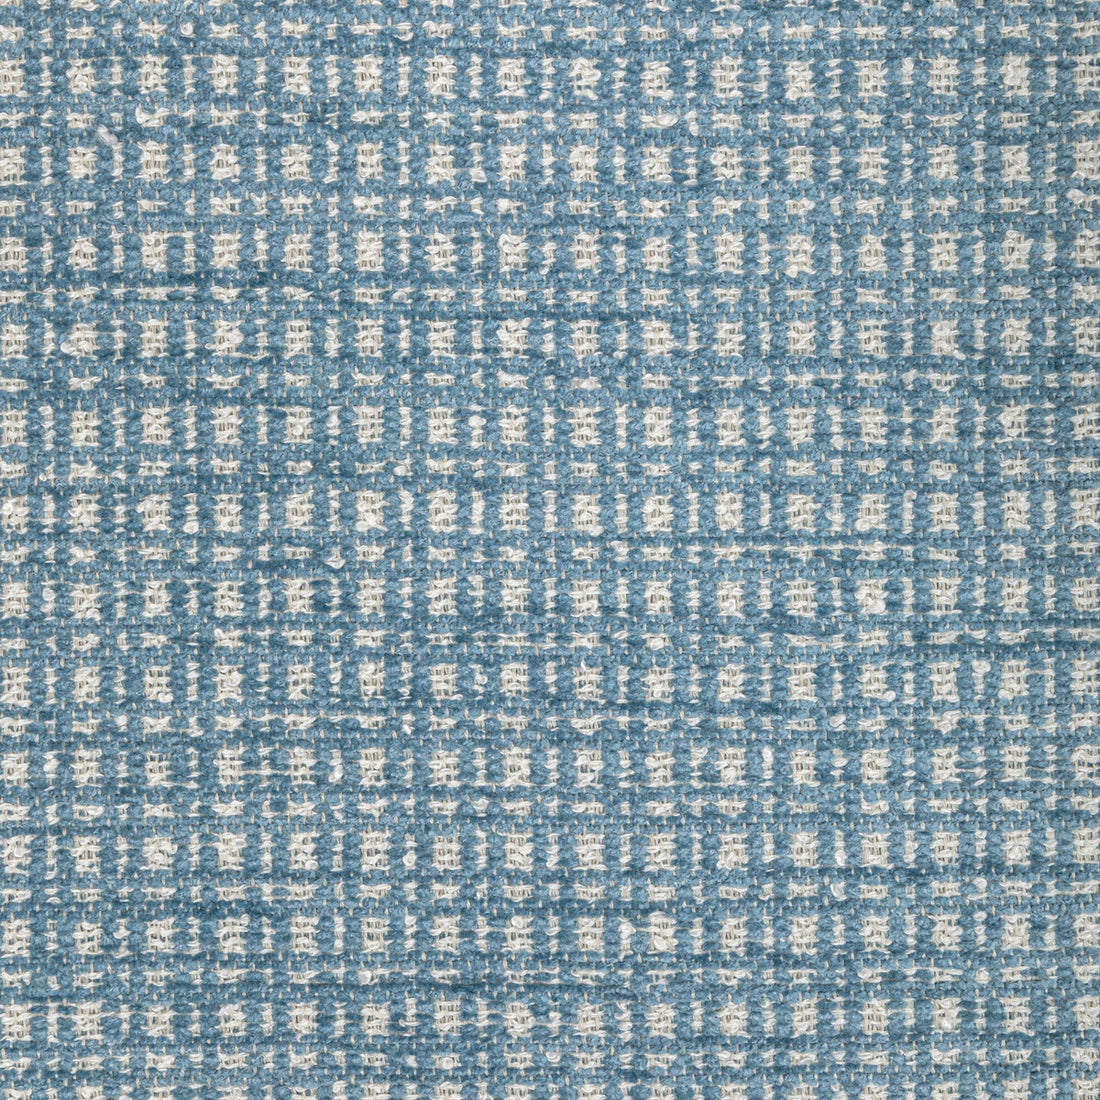 Landiers Texture fabric in blue color - pattern 8022123.5.0 - by Brunschwig &amp; Fils in the Chambery Textures III collection